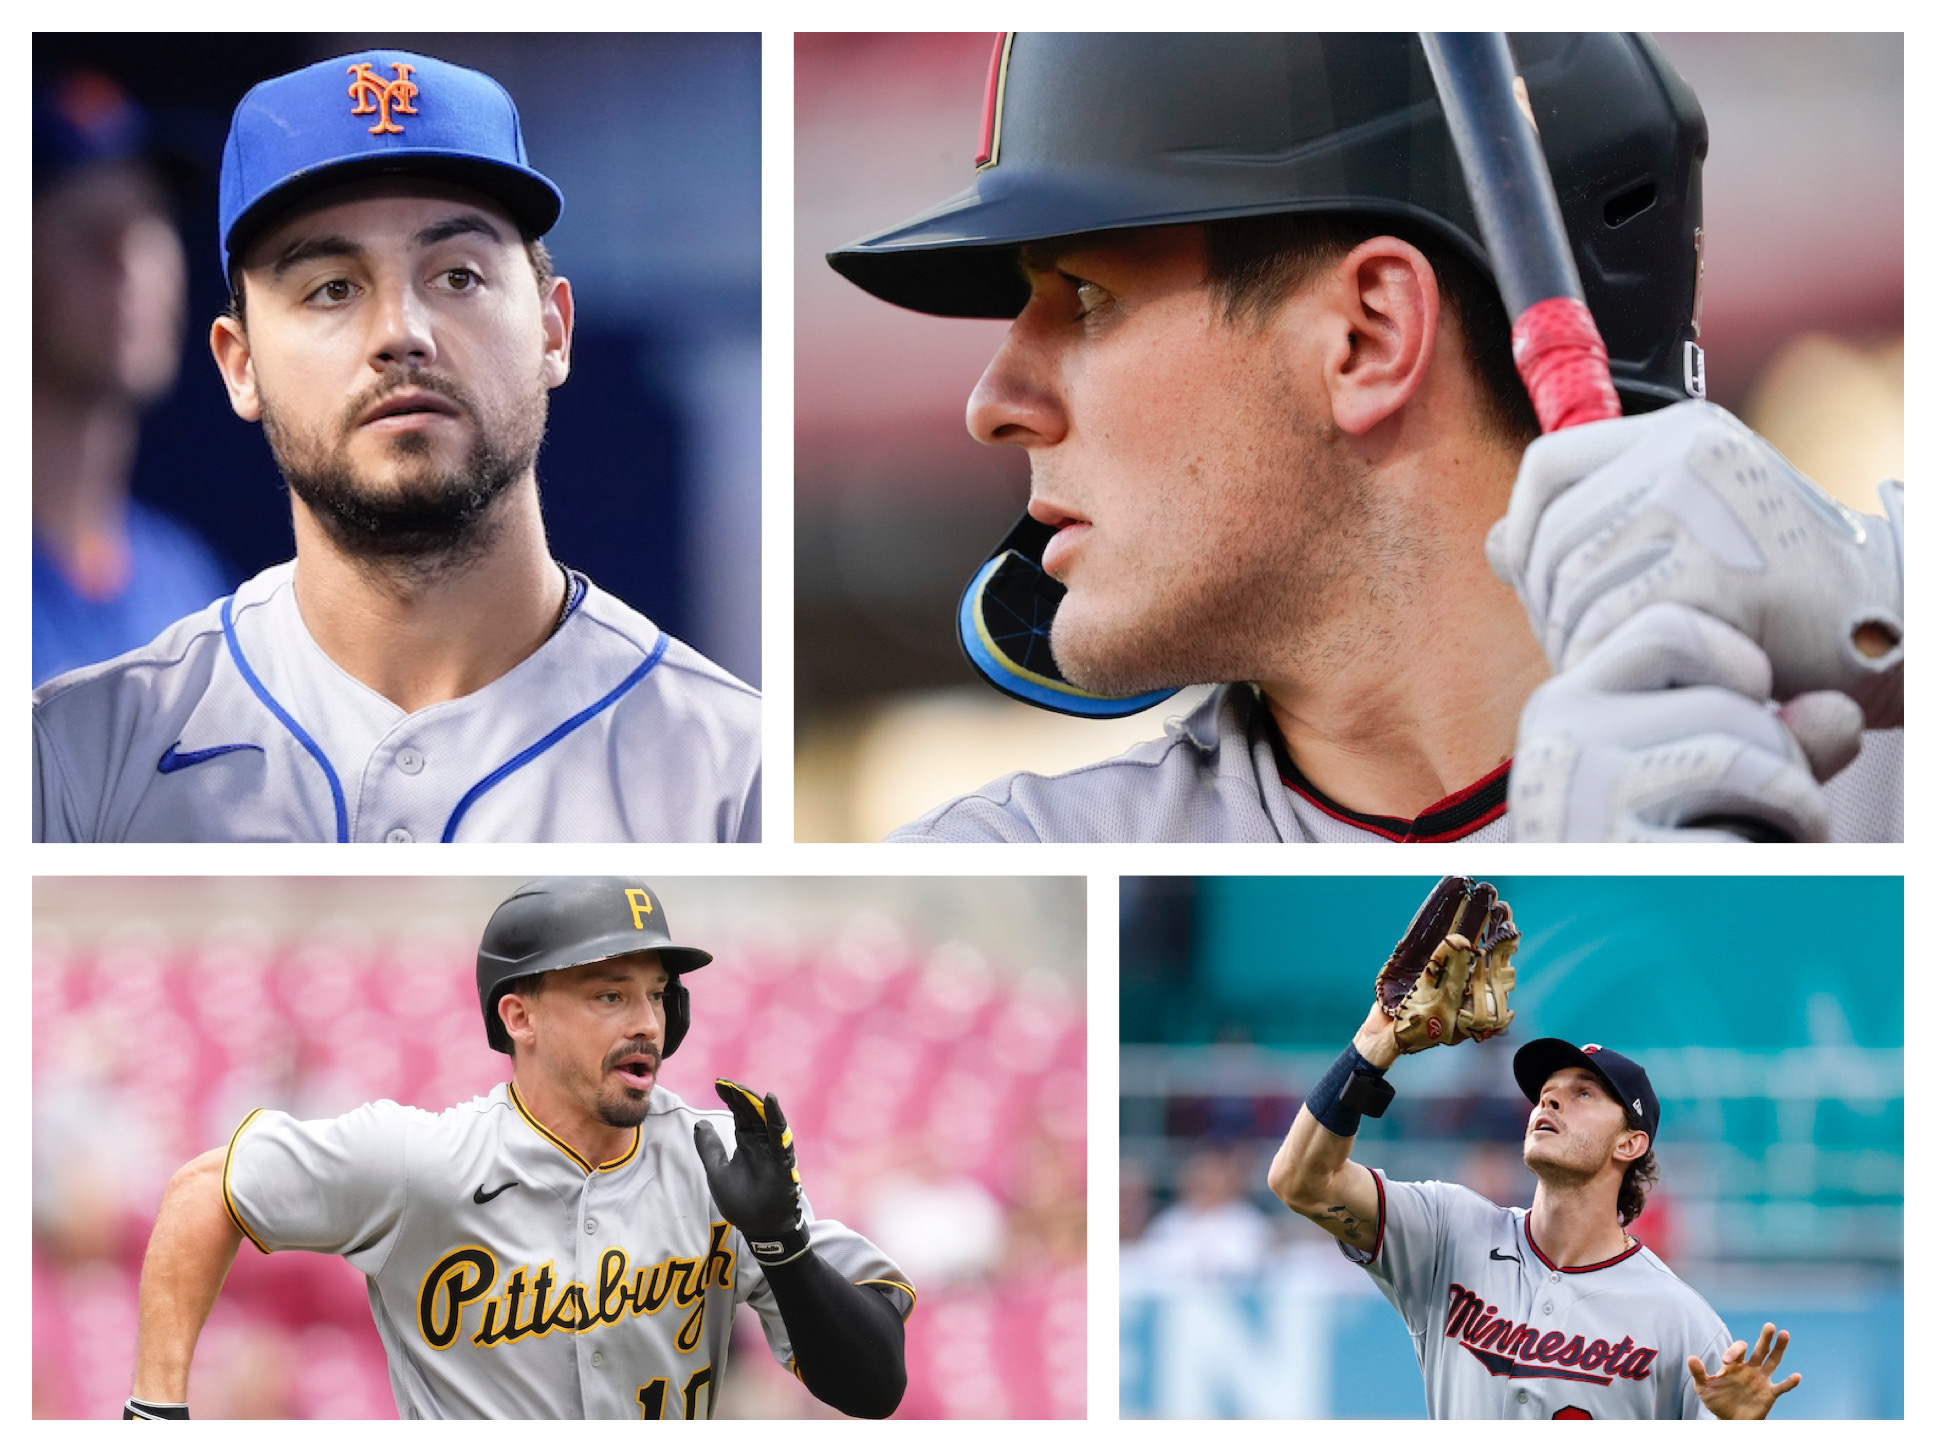 NY Mets: How will Michael Conforto's injury affect his free agency?